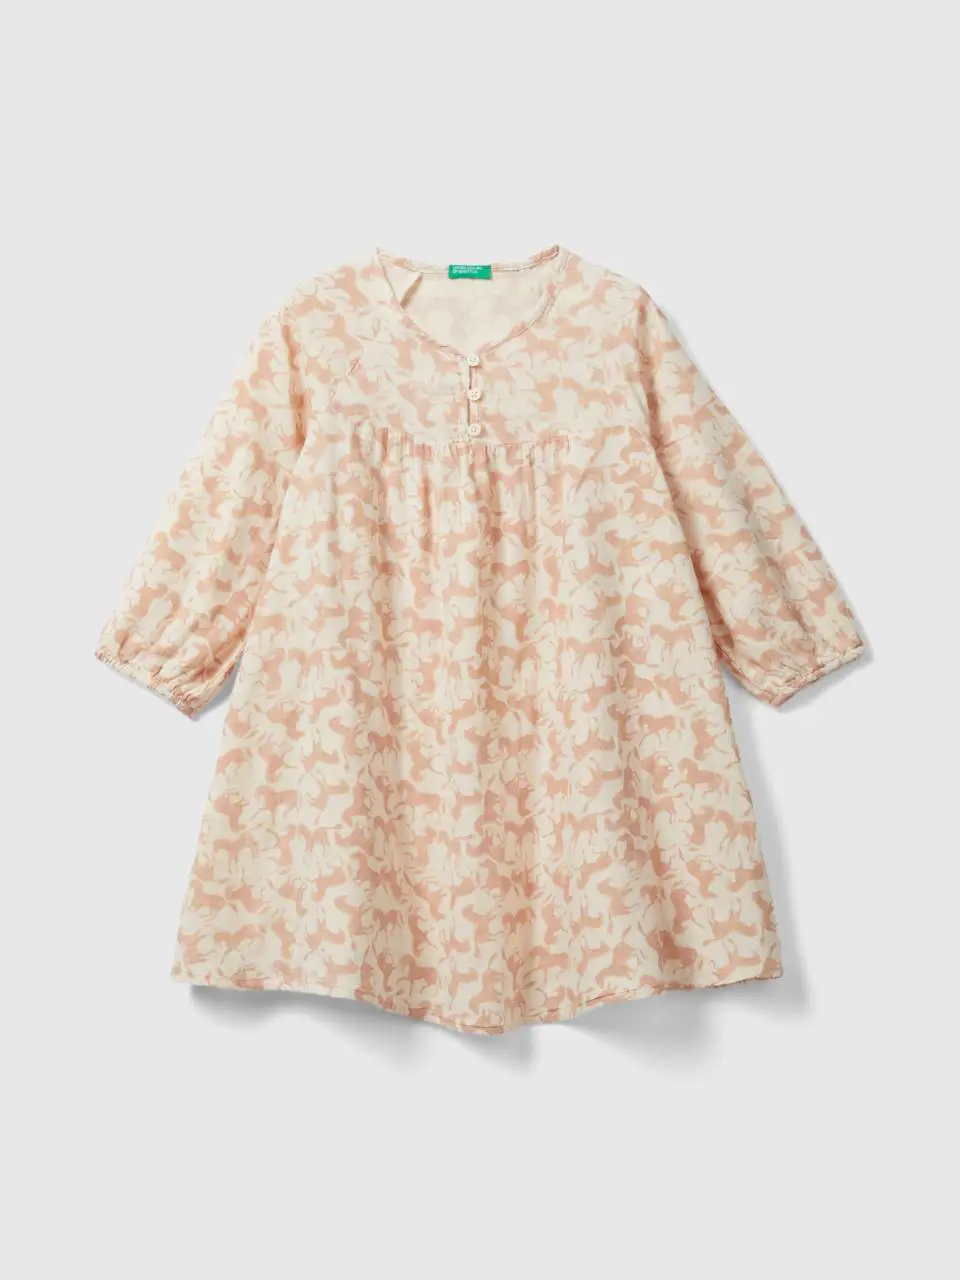 Benetton dress with horse print. 1